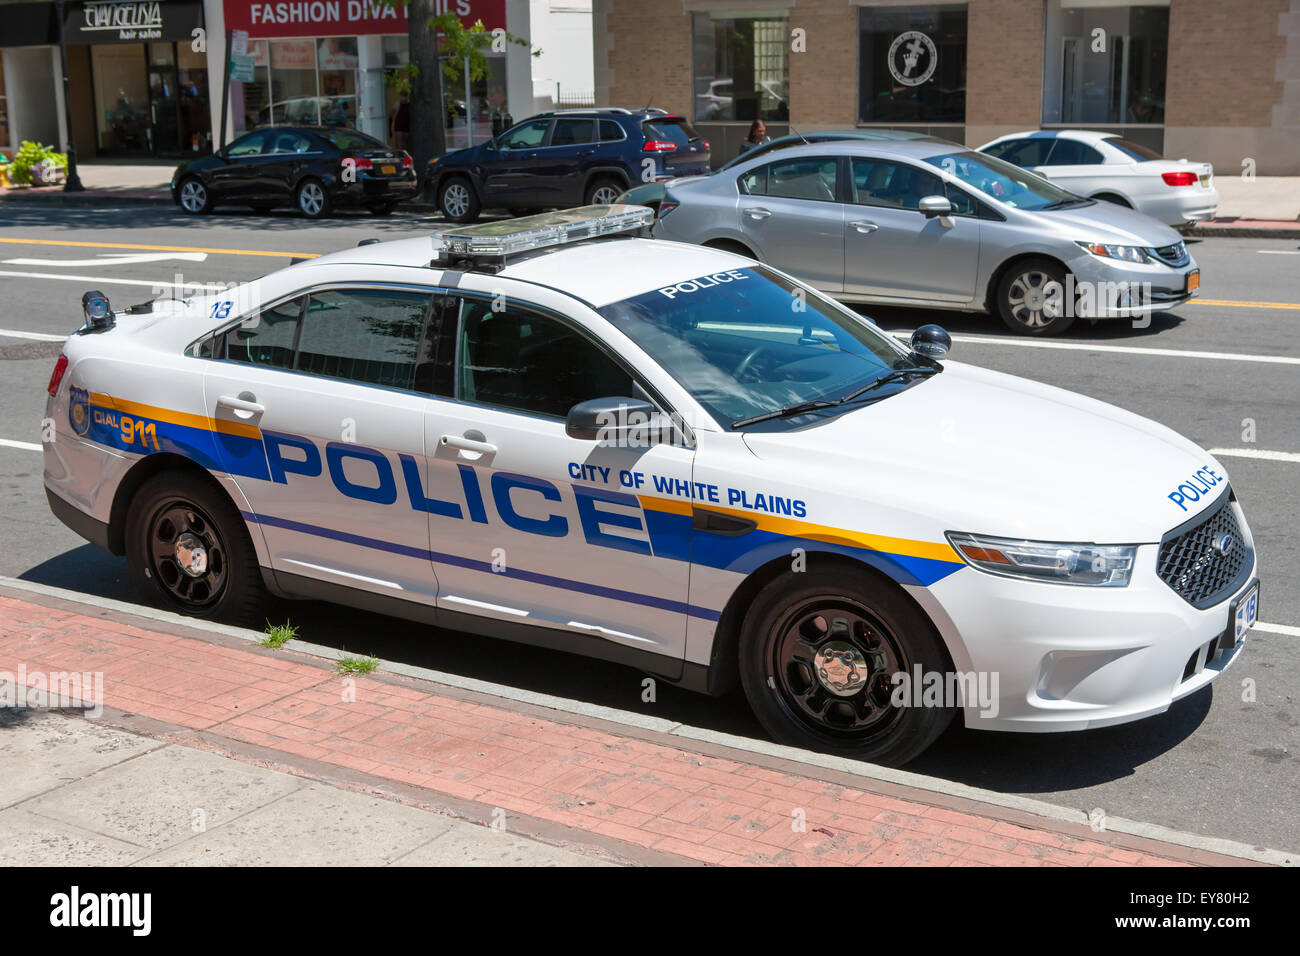 A police car of the White Plains police department parked in White Plains, New York. Stock Photo